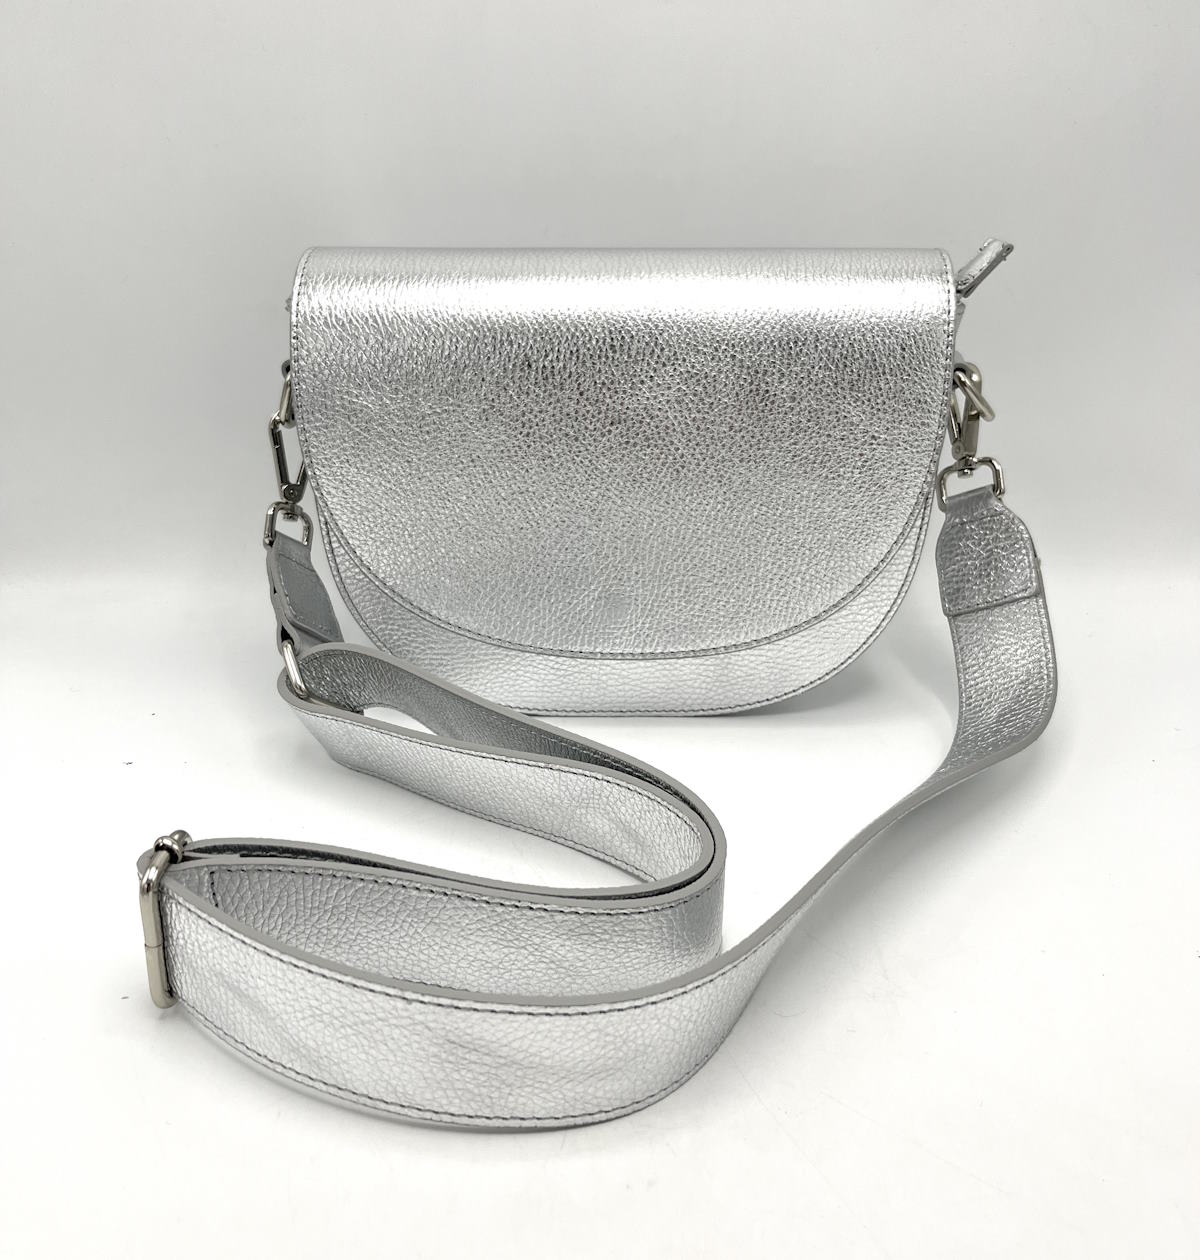 Genuine leather shoulder bag, for women, made in Italy, art. 112431